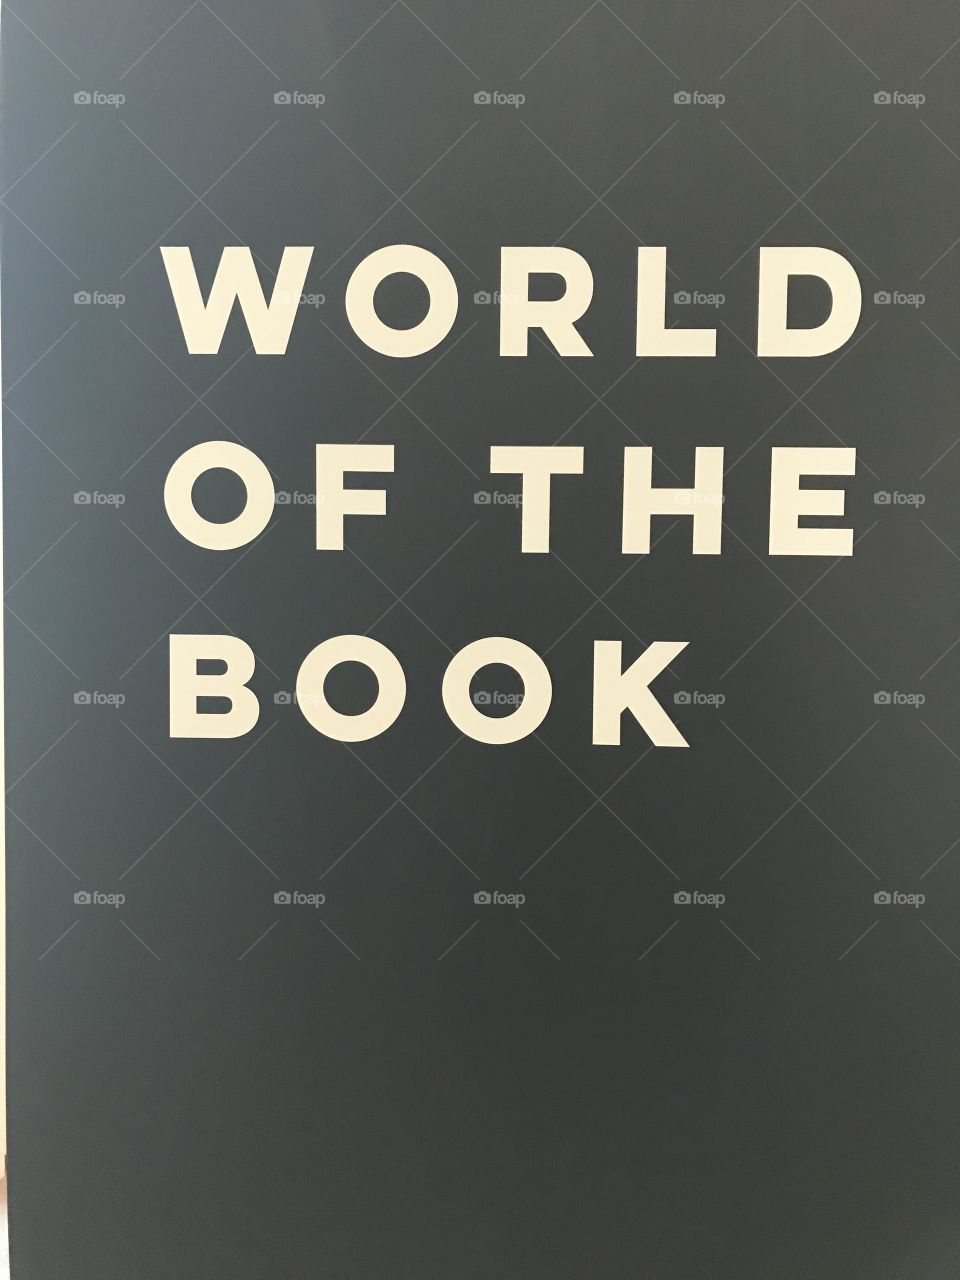 World of the book